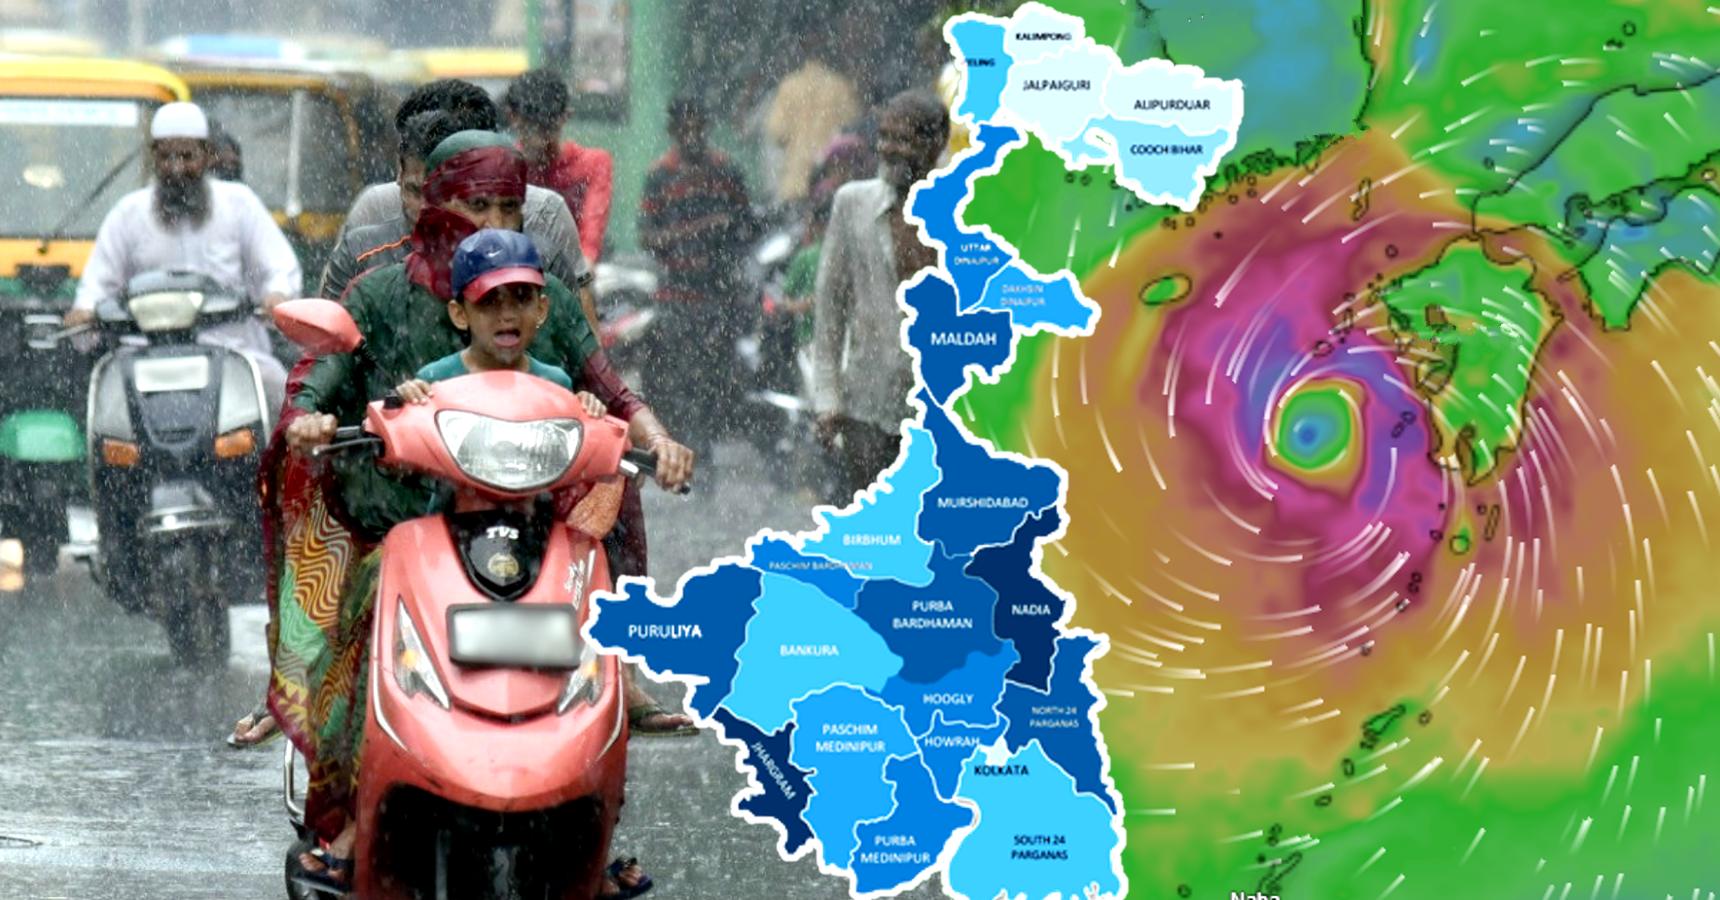 9th August Kolkata West Bengal Weather Update South Bengal Aajker Abohaowa